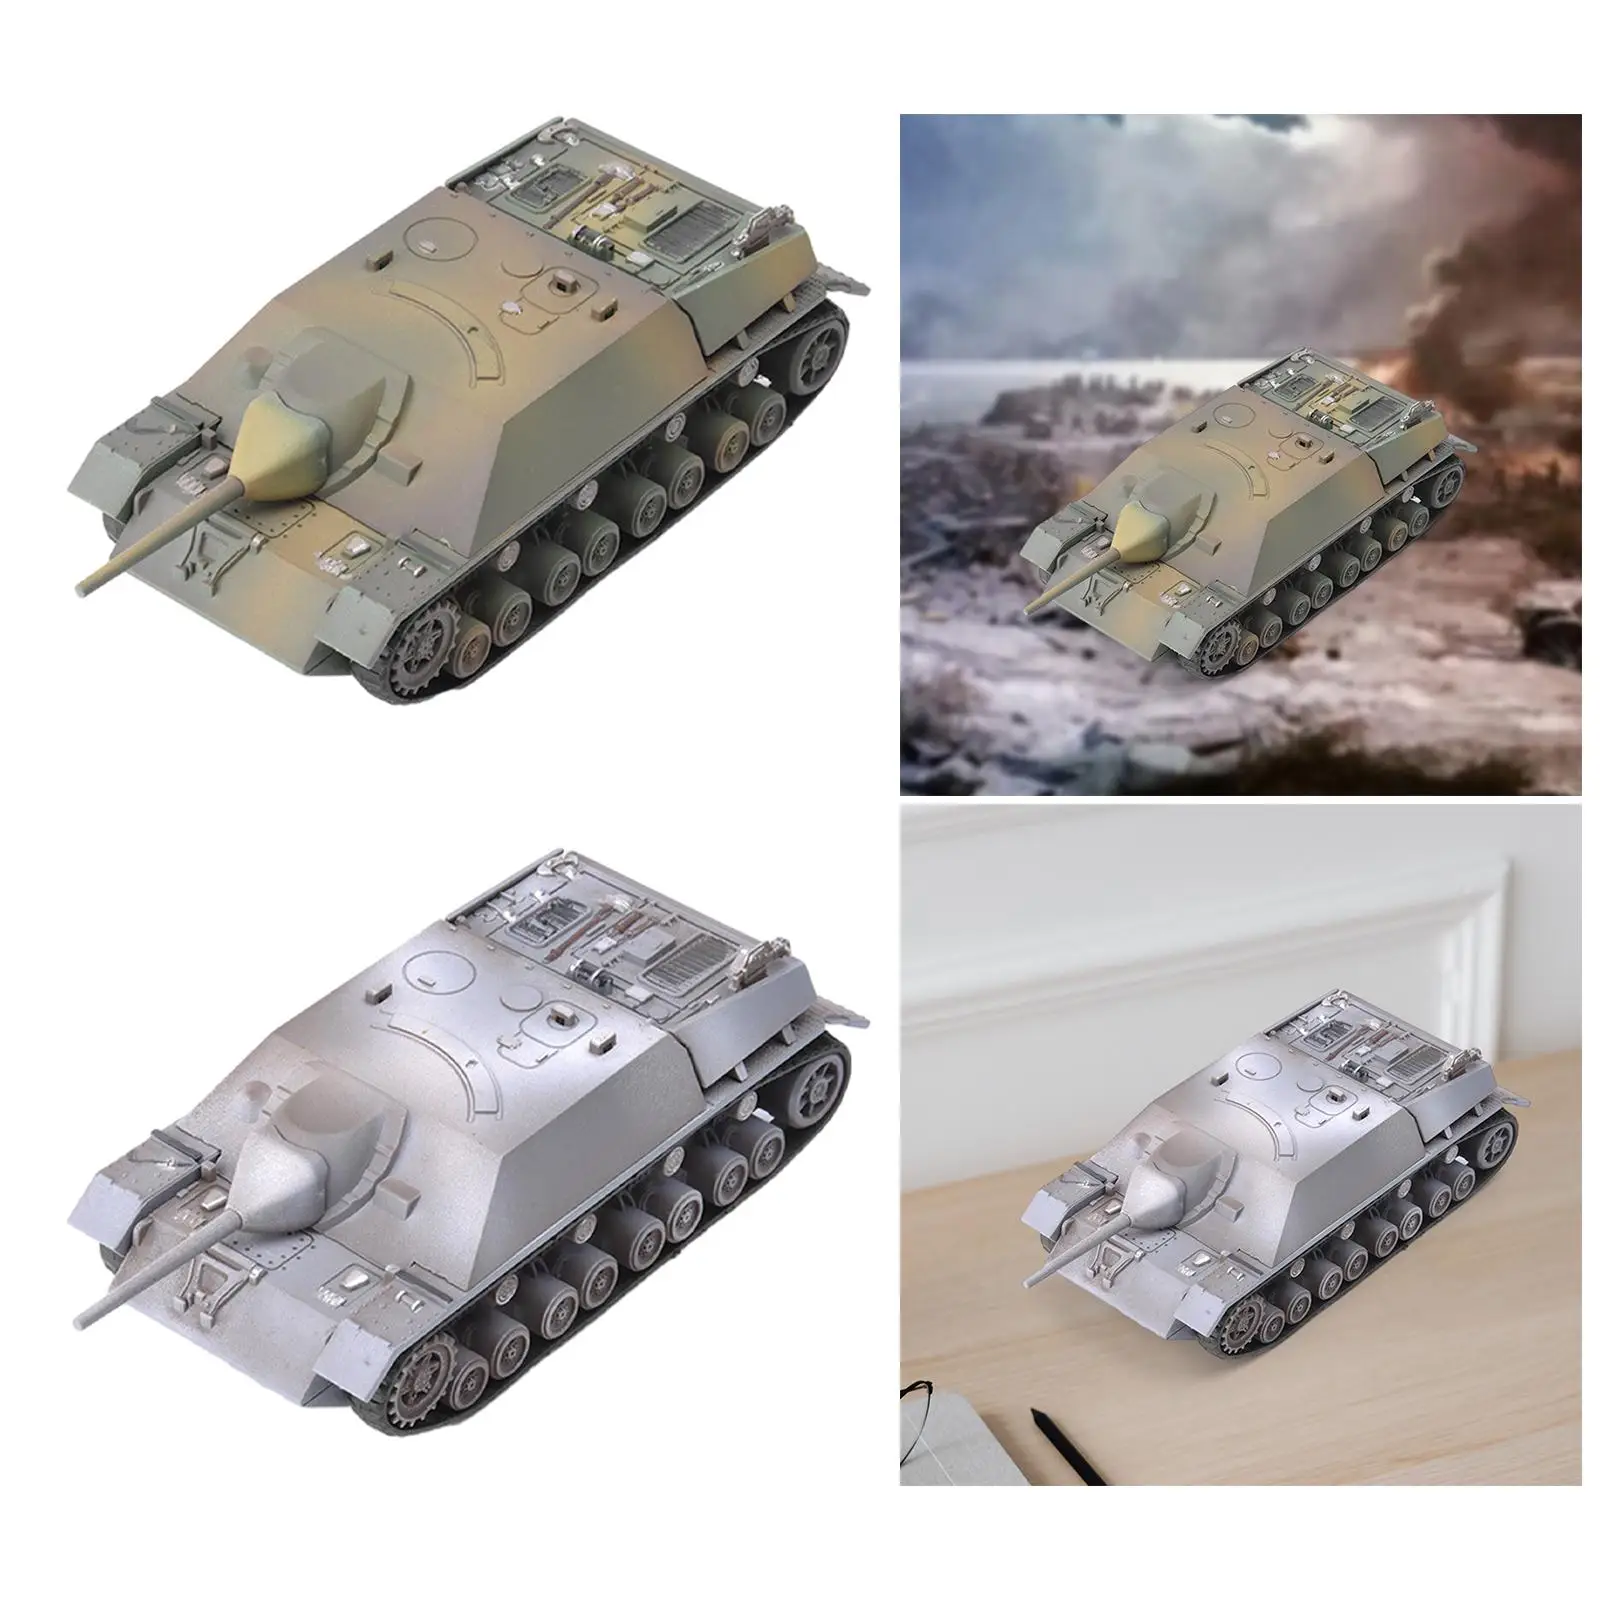 1:72 Scale 4D Tank Model DIY Assemble Table Scene Ornament Party Favors Collectible Battle Tank Toy for Kids Girls Birthday Gift